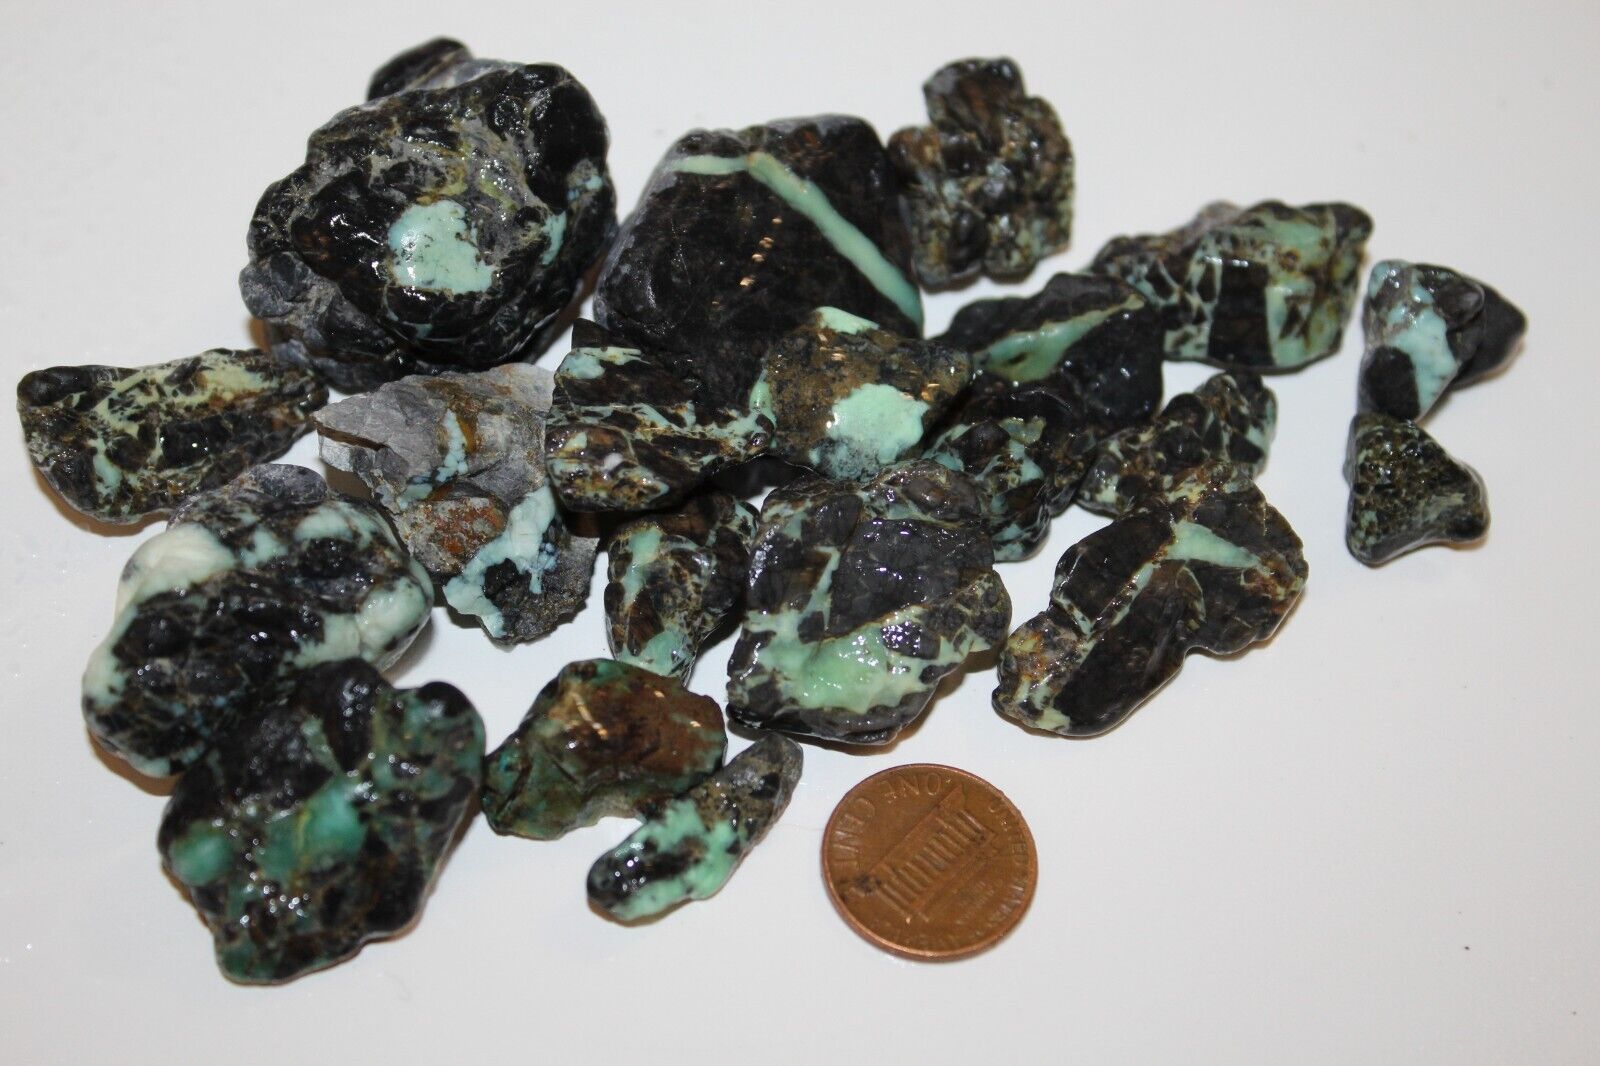 Lander County Bluish/Green Turquoise in Black Matrix 181g MADE IN the USA Nevada